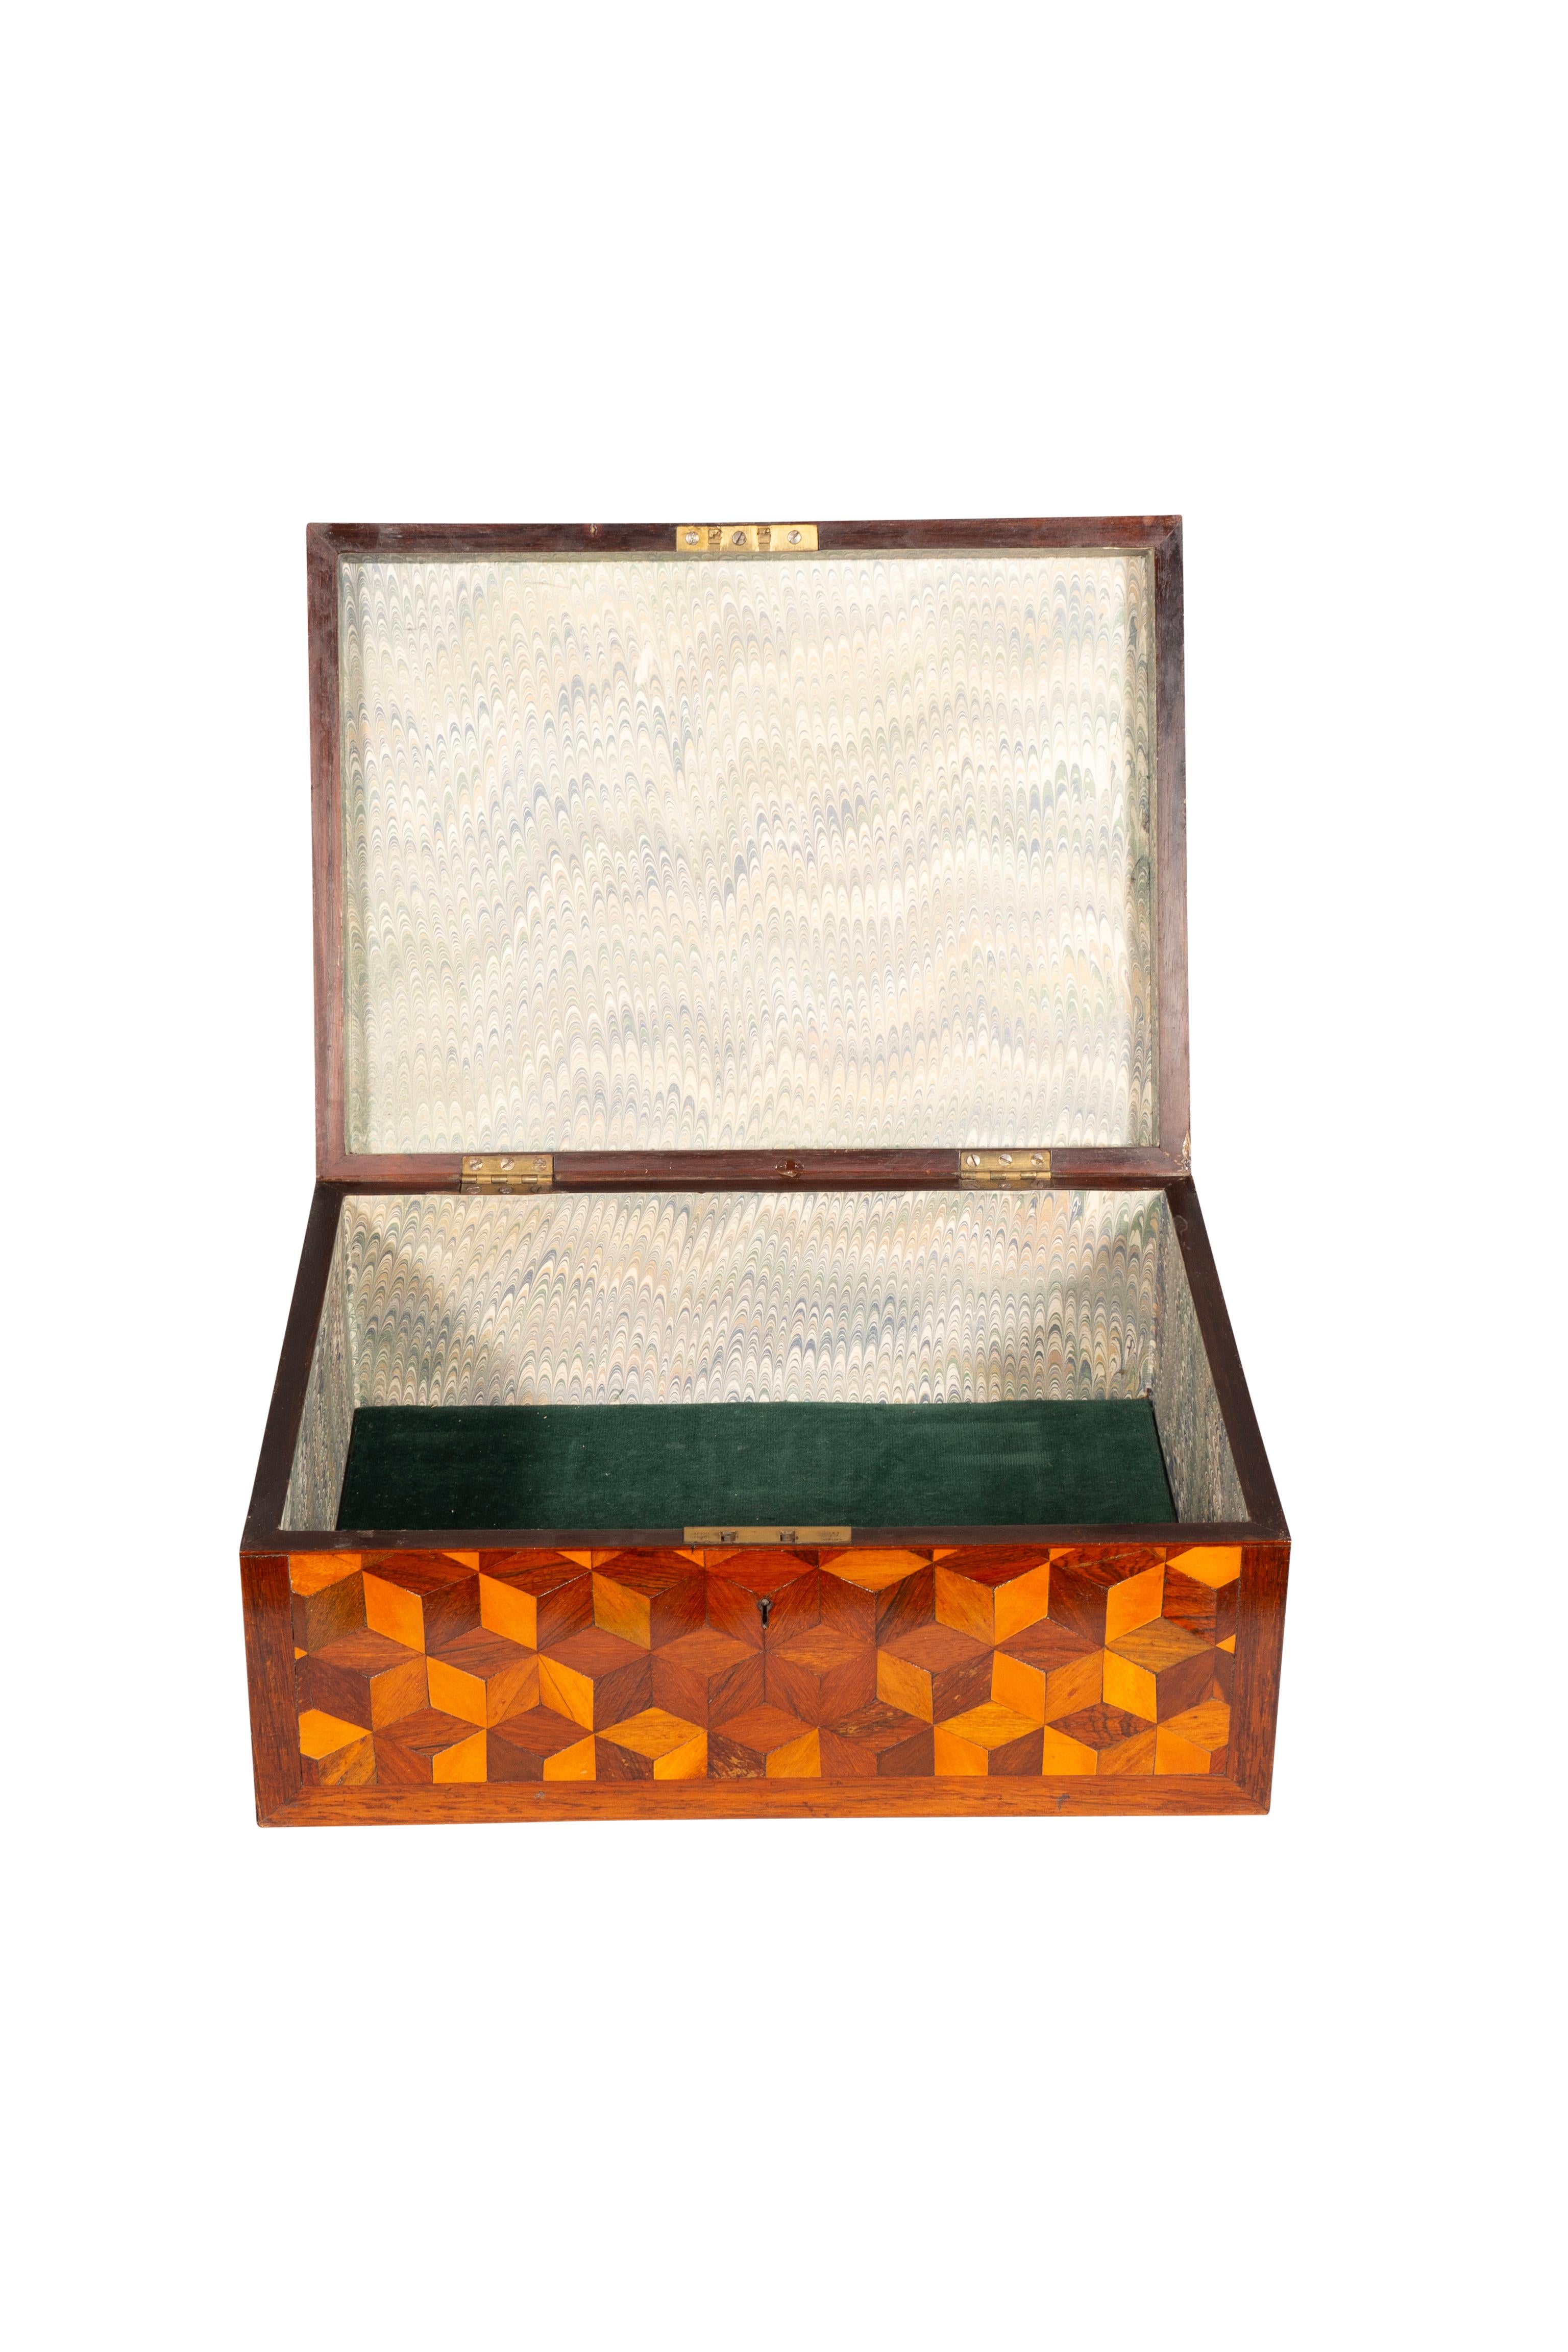 Regency Parquetry Box For Sale 3